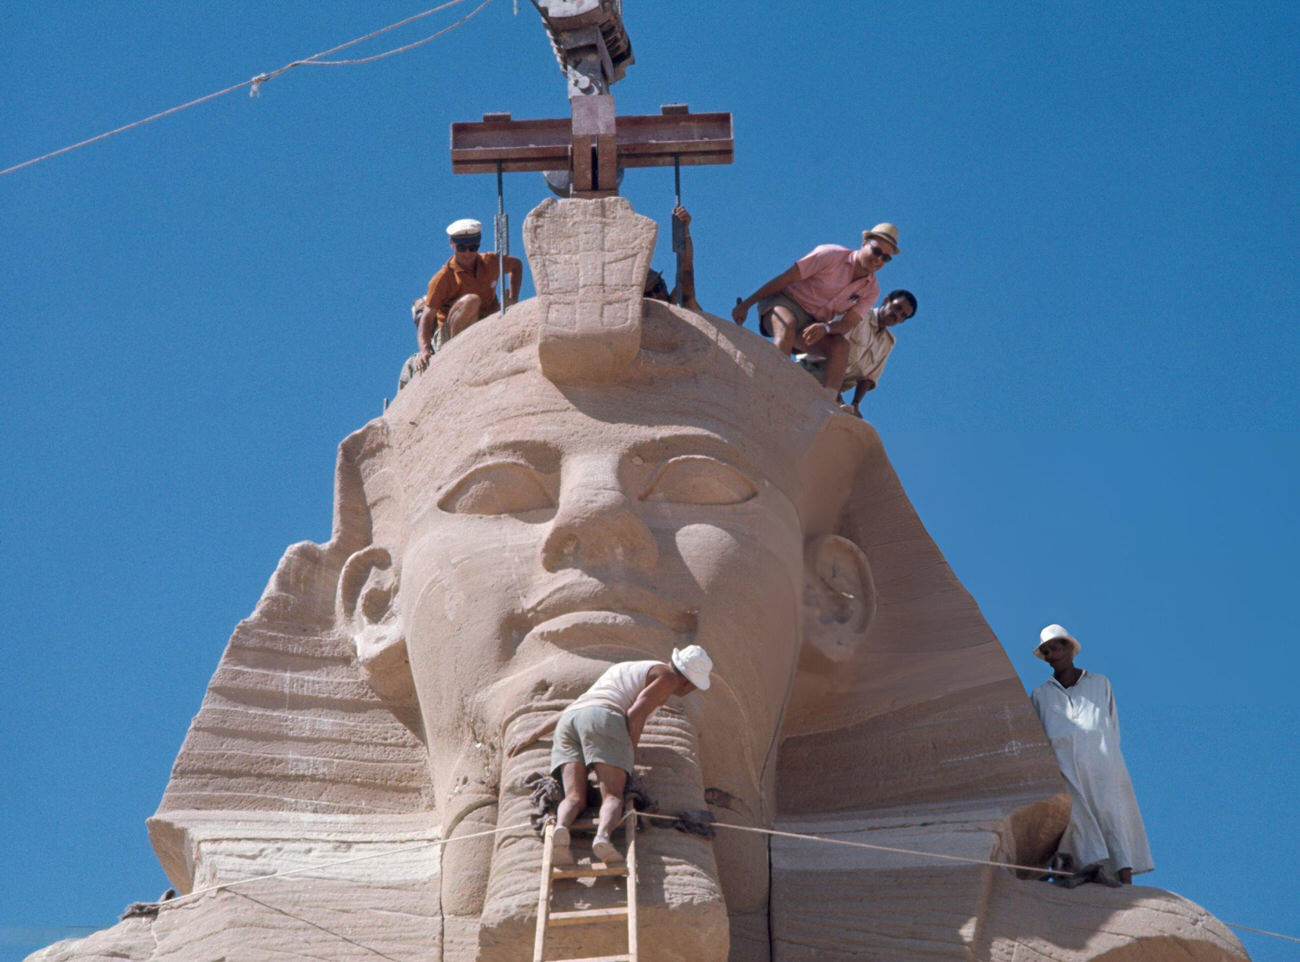 The relocation of Abu Simbel's ancient temple in 1967